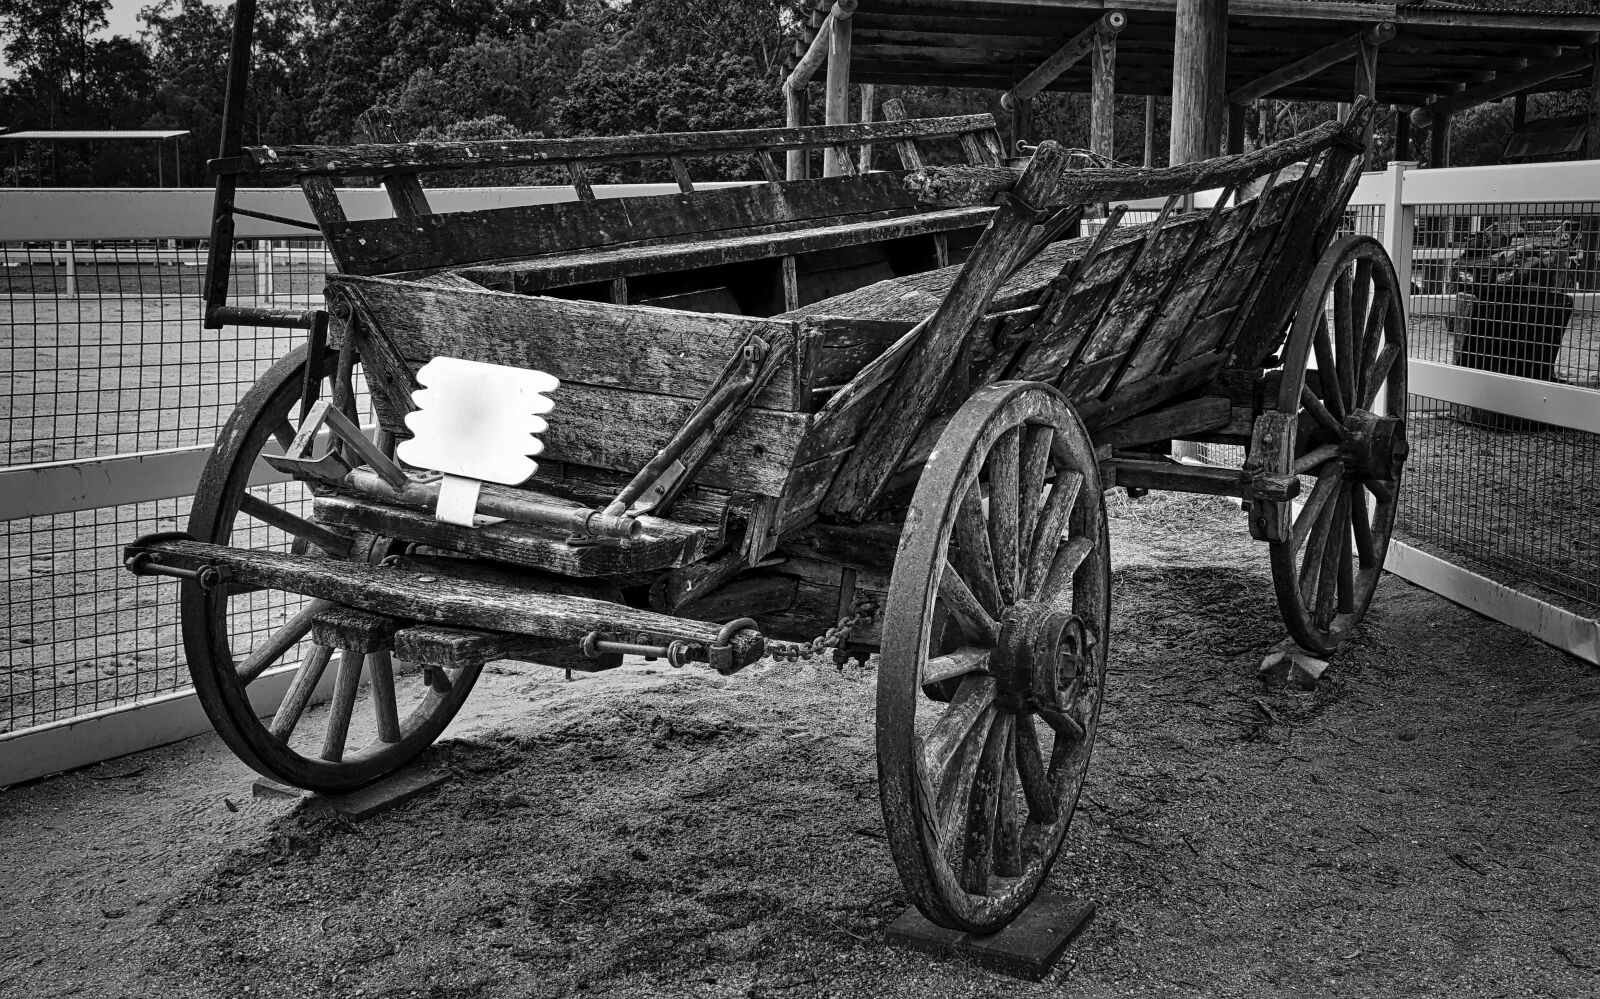 Sony Cyber-shot DSC-RX100 III sample photo. Wagon, vintage, wooden photography